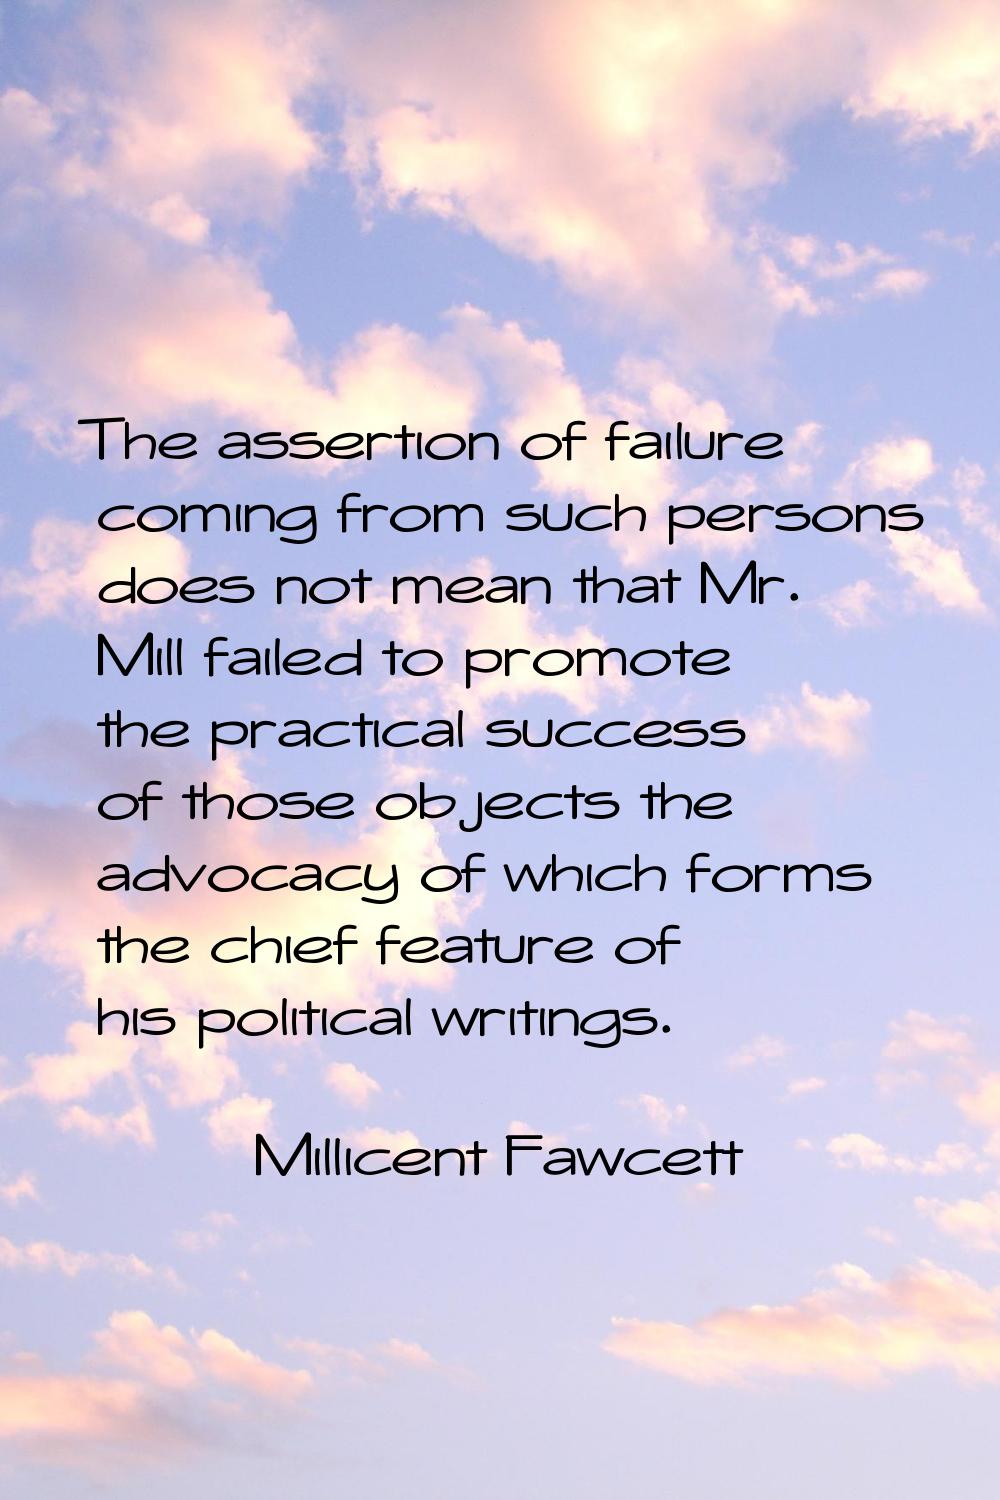 The assertion of failure coming from such persons does not mean that Mr. Mill failed to promote the